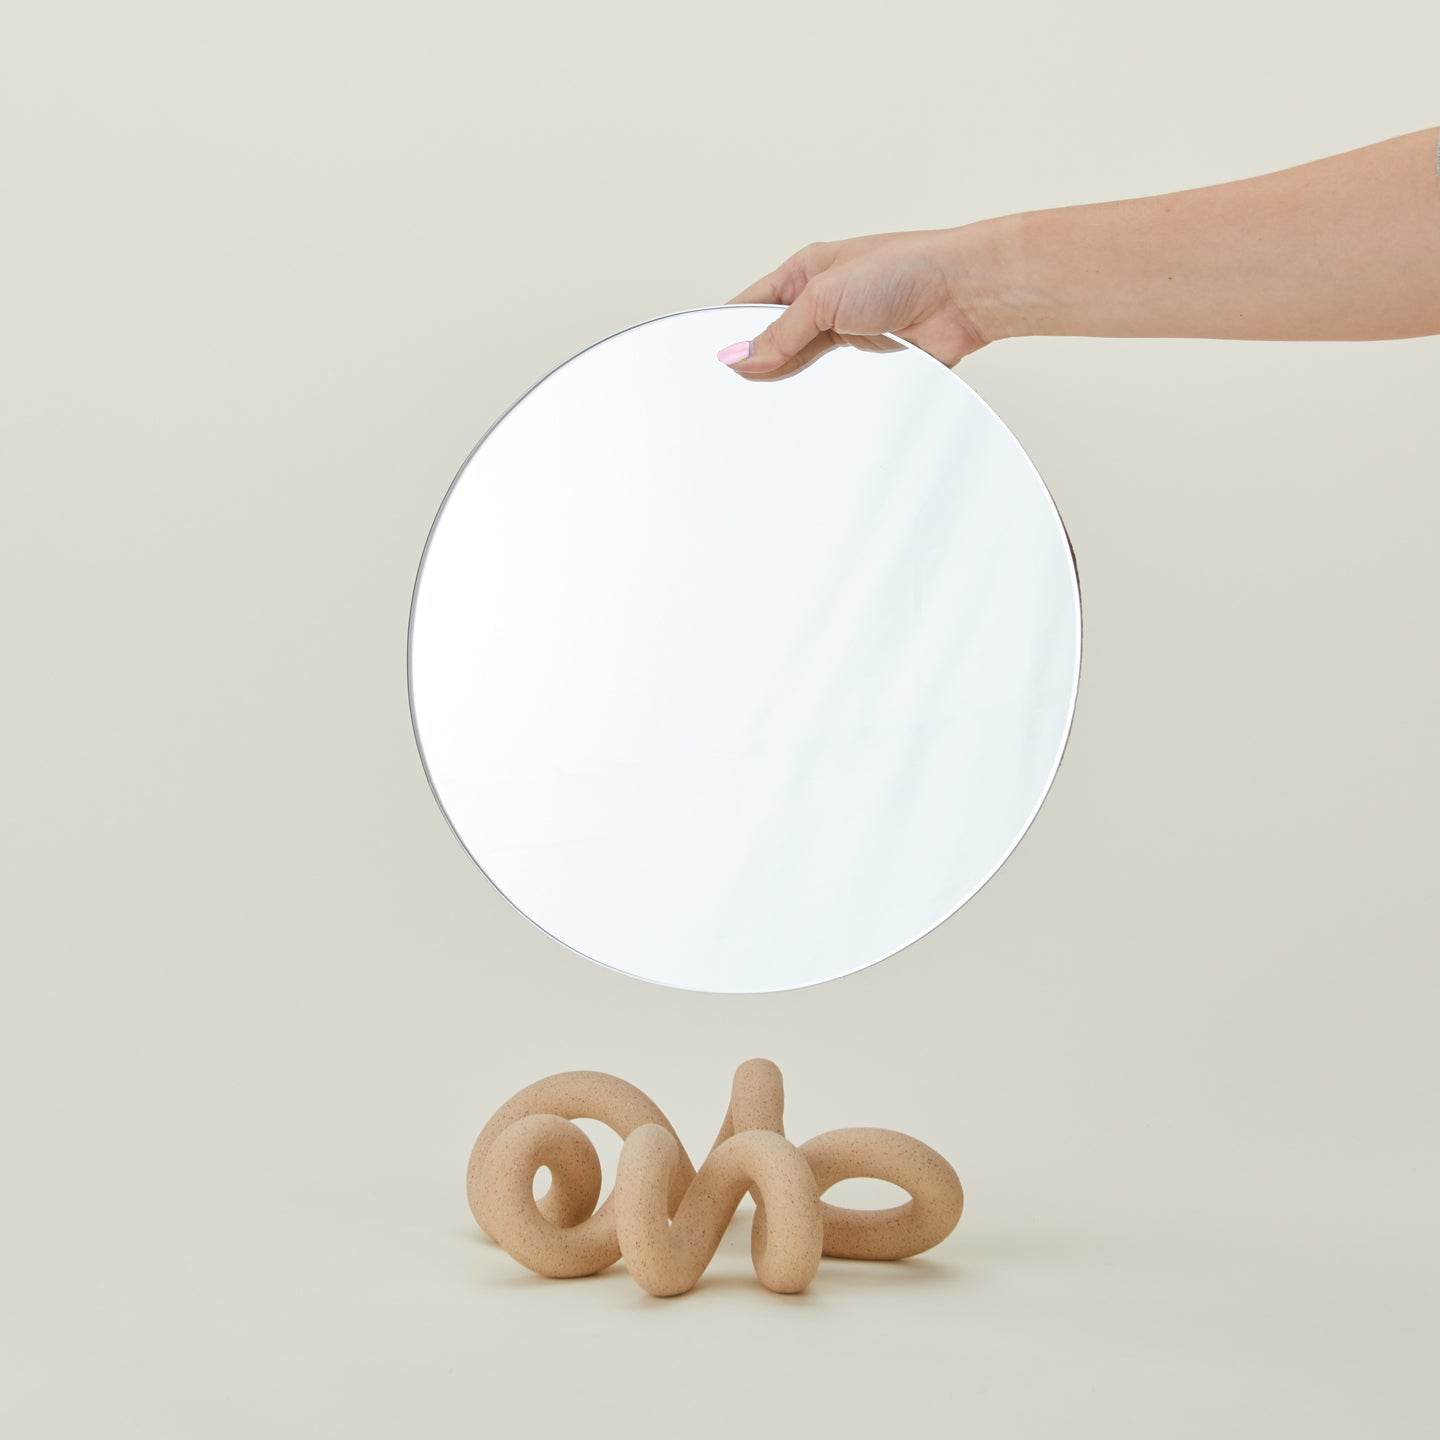 Curlee Table Mirror